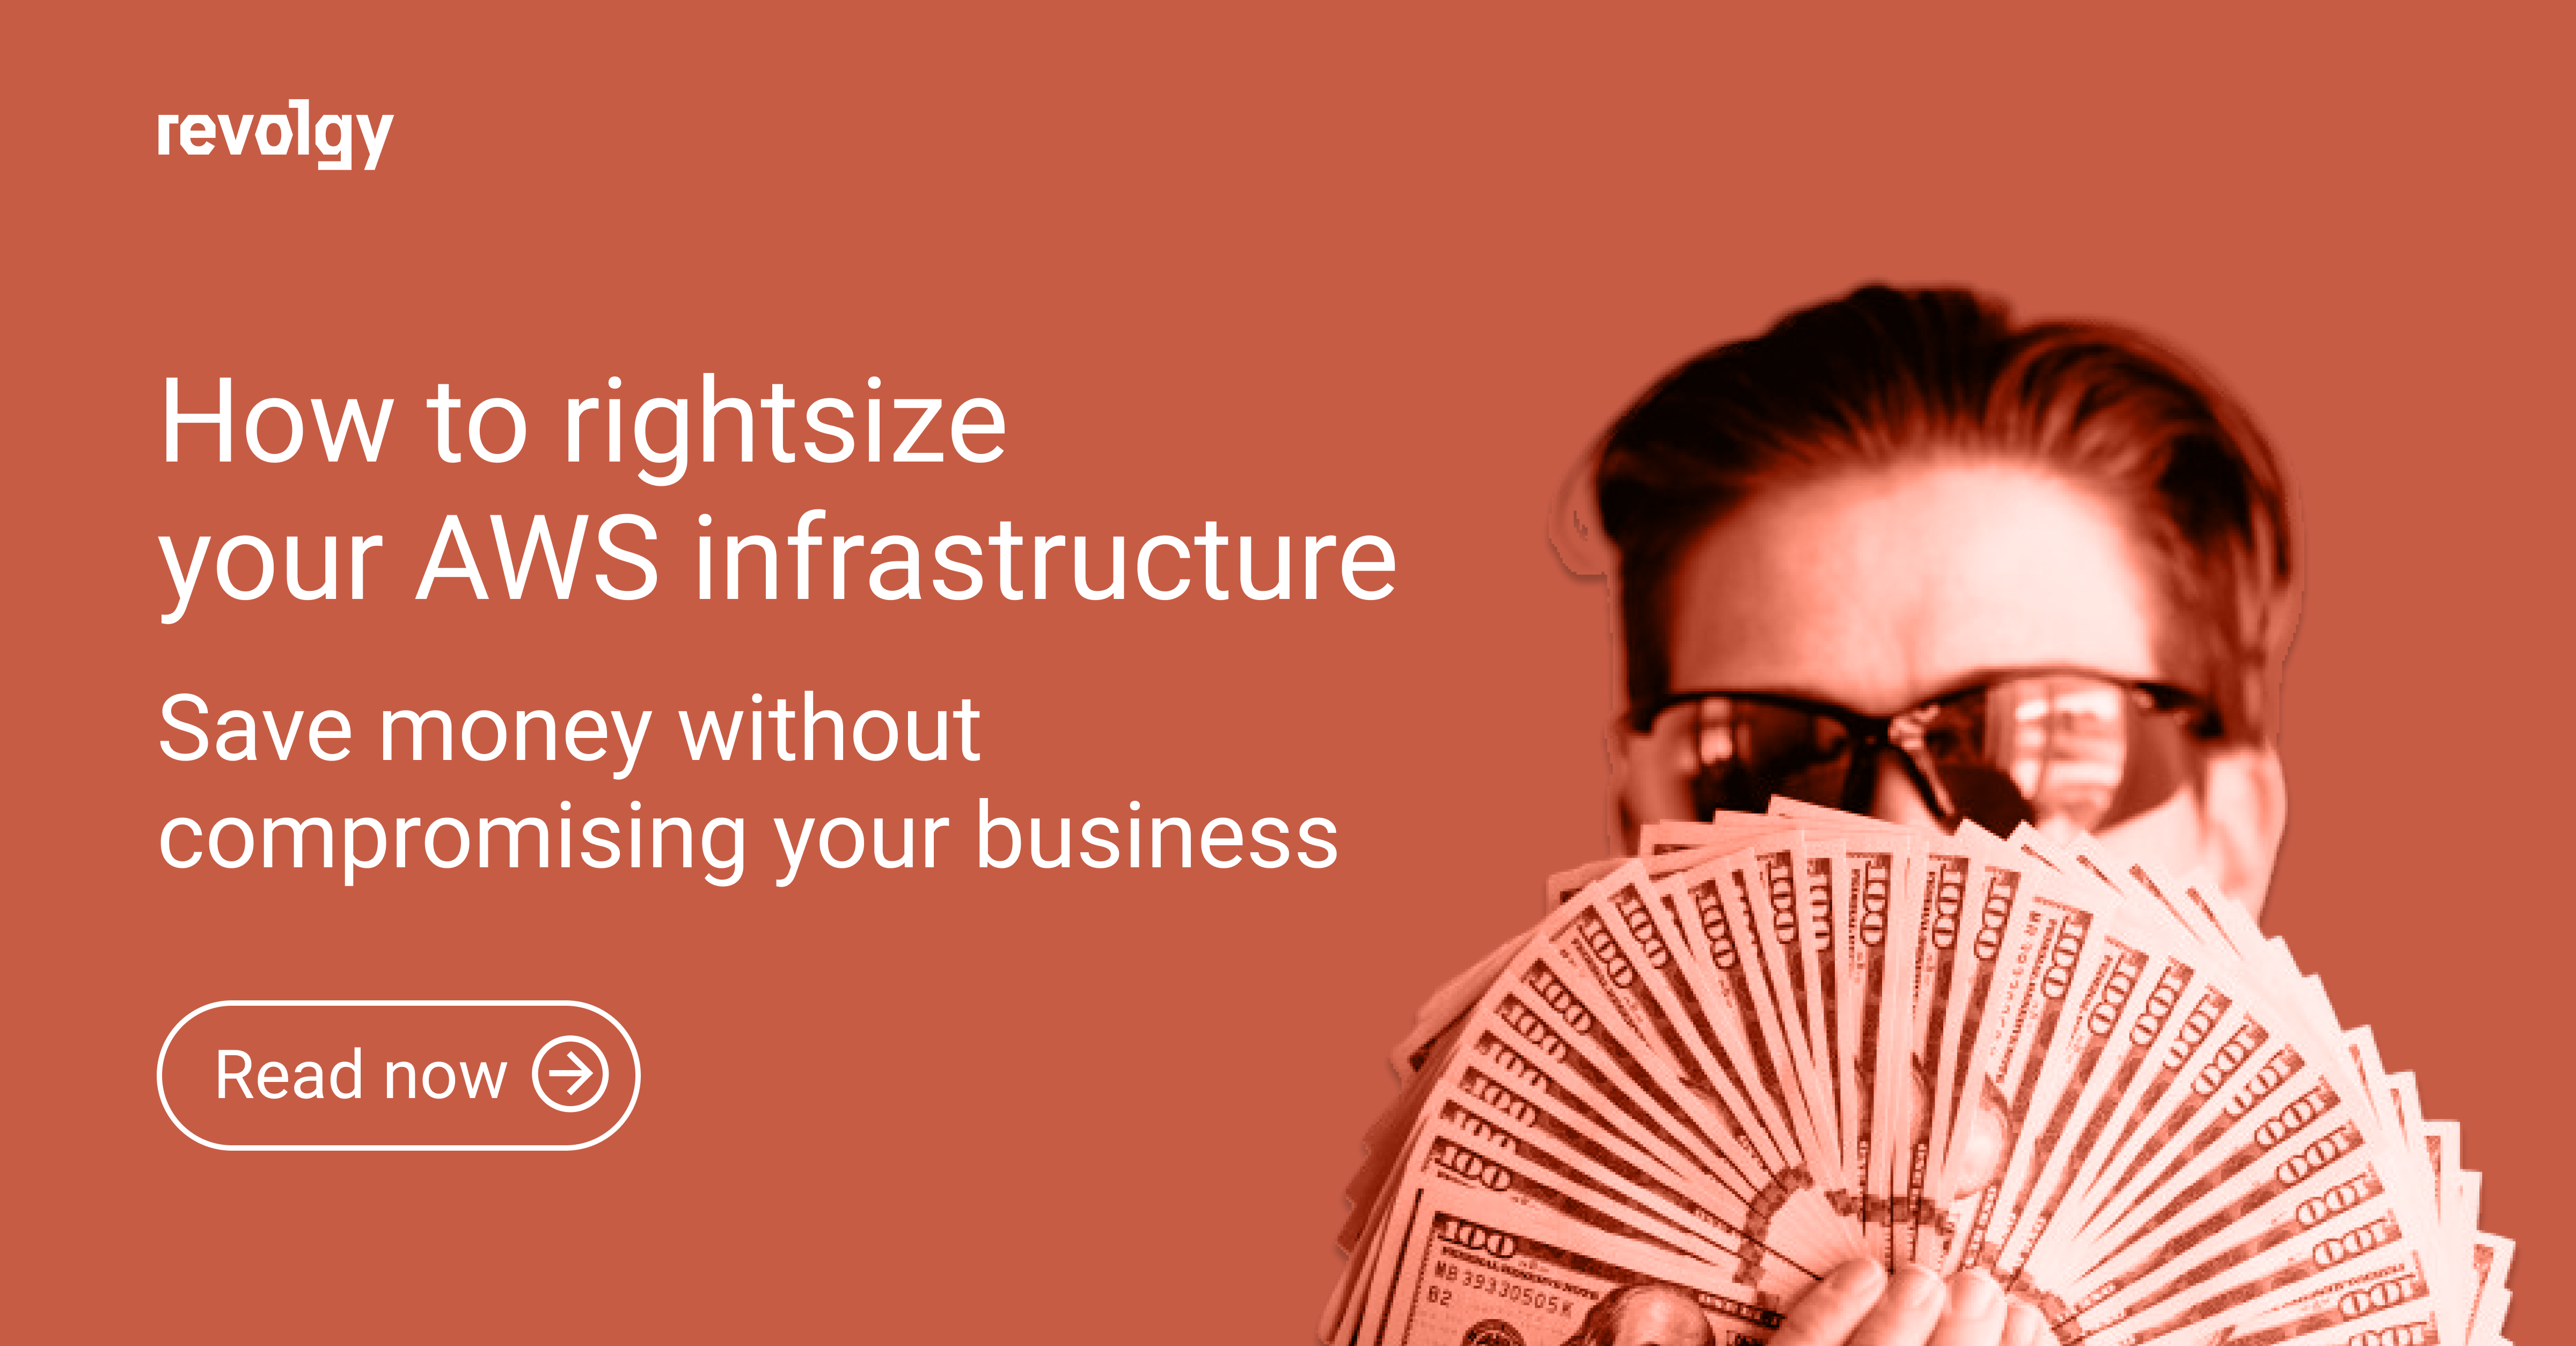 revolgy blog Rightsizing your AWS infrastructure_ save money without compromising your business needs